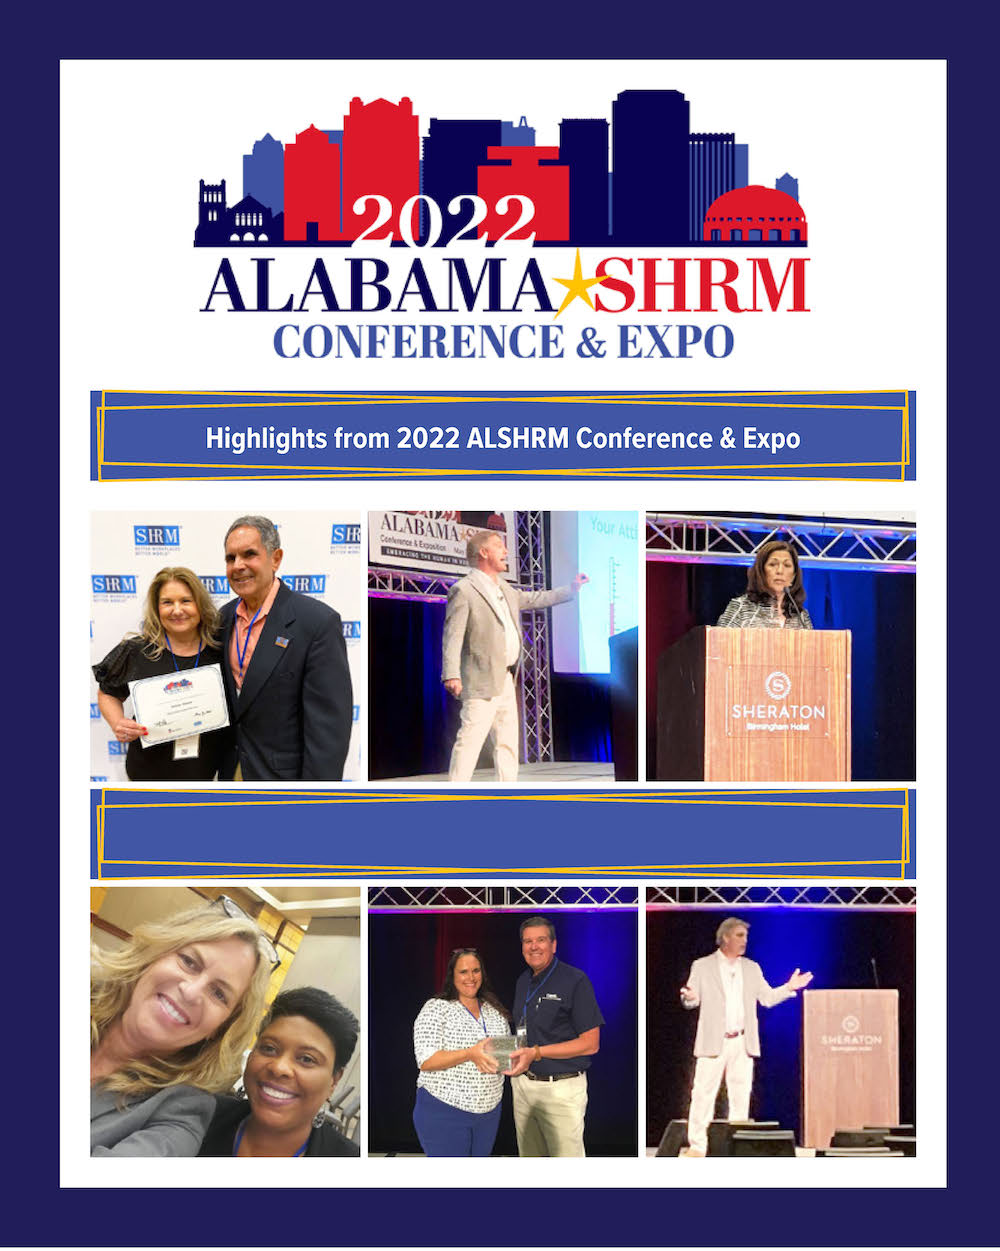 Highlights from the 2022 Alabama SHRM Conference & Expo in Birmingham